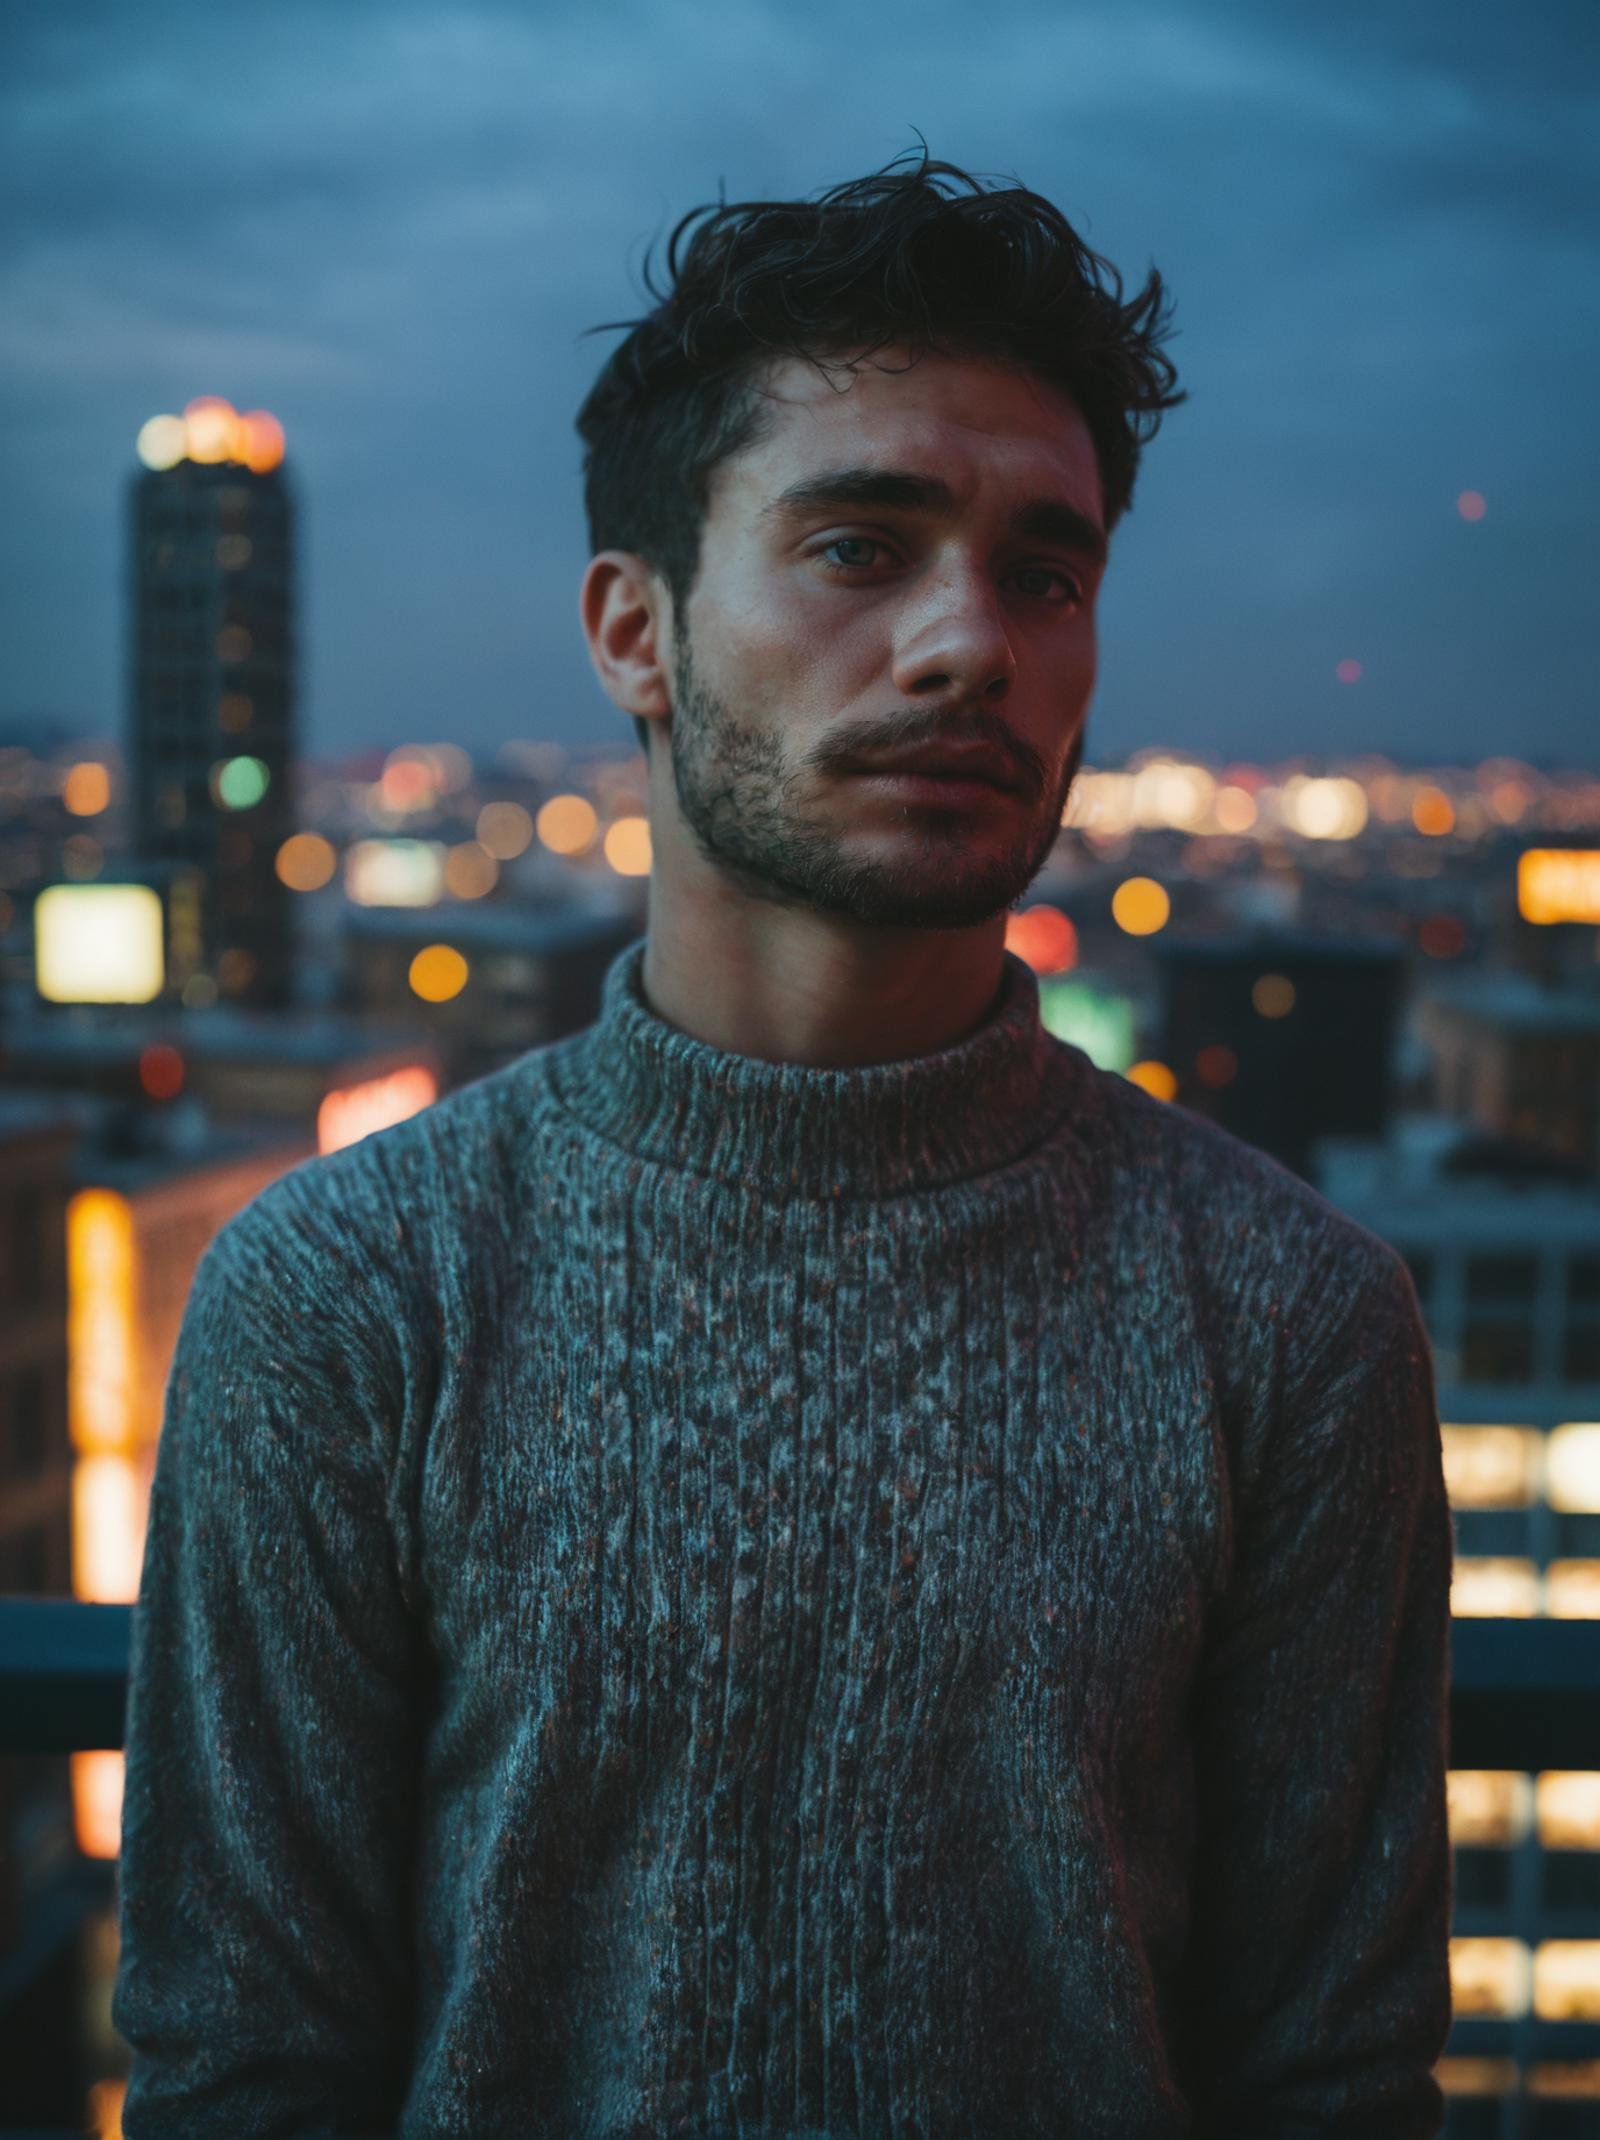 score_9, score_8_up,score_7_up, realistic, closeup photo of a man wearing fitted sweater, facial hair, blurred city skyline, urban rooftop, twilight, natural light, city lights, subtle backdrop, intense and introspective mood, skin texture, modern (rugged:0.4) aesthetic, thoughtful expression, cropped torso, under dramatic edge lighting, triangular composition, shot on a Sony A7III